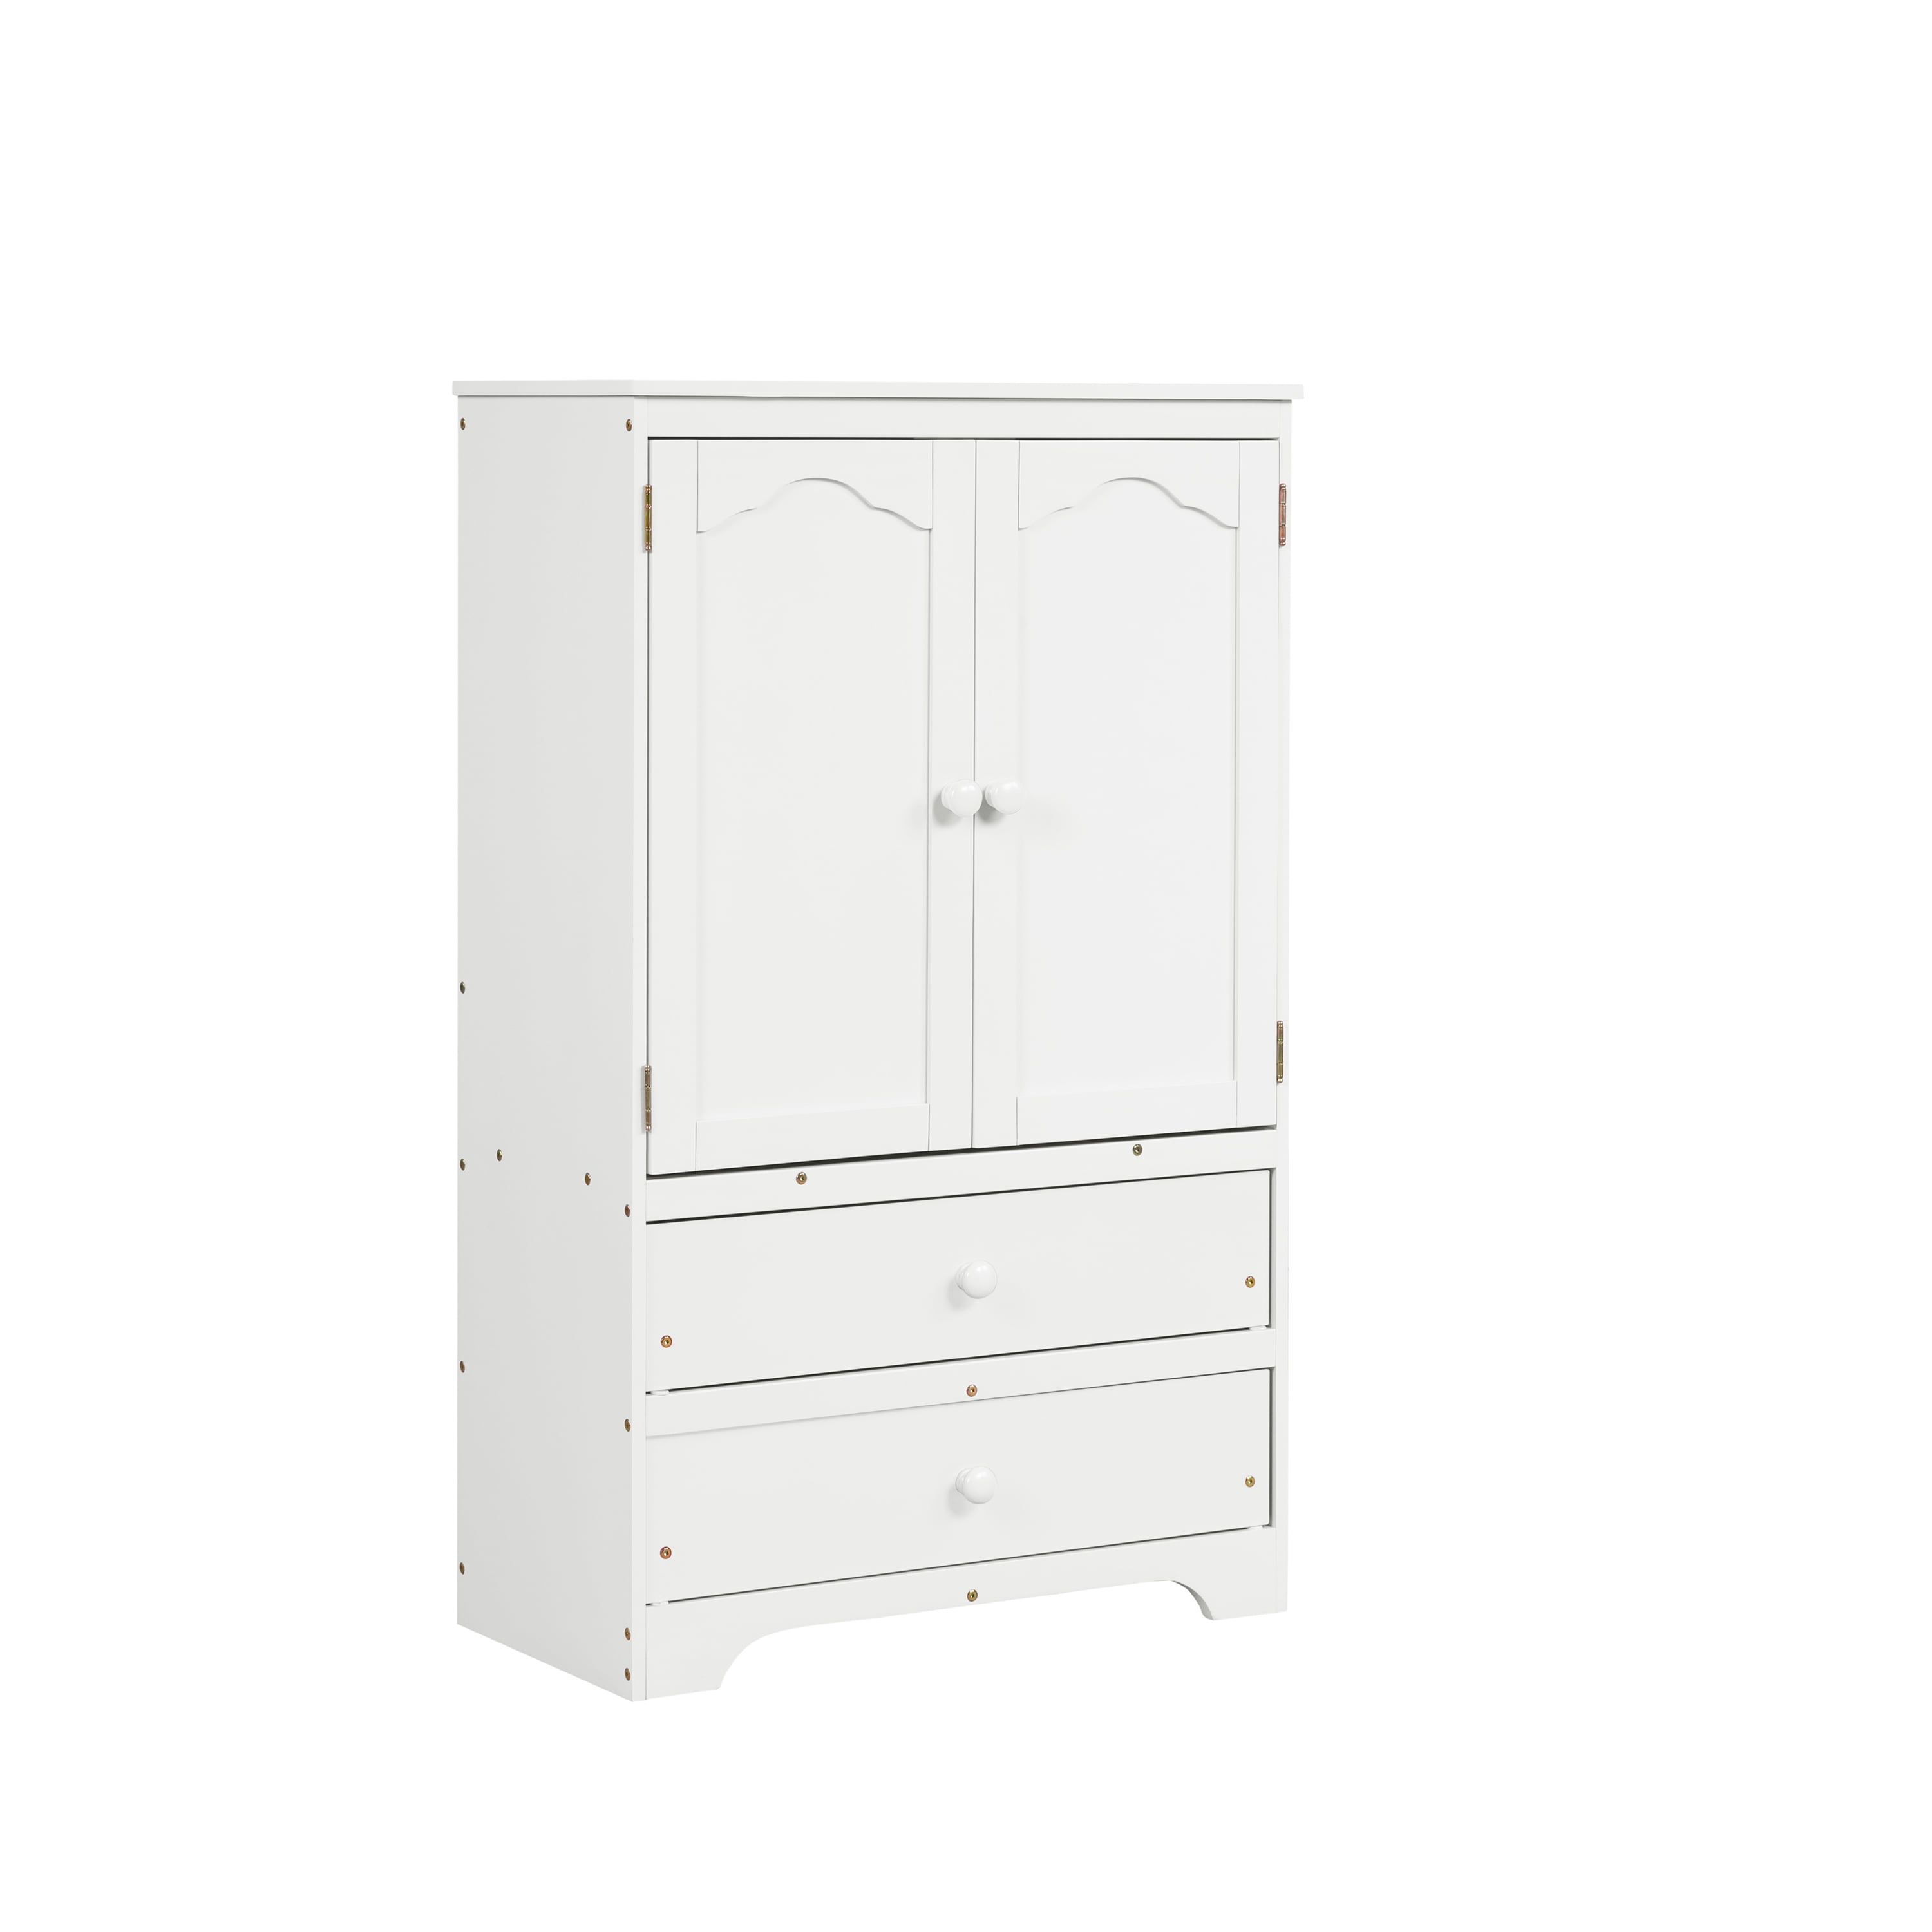 Inclake Pine Wood Kids Play Wardrobe With 2 Doors And 2 Drawers, Children  Dress Up Storage Side Cabinet Clothes Hanging Closet With A Clothes Rail  And A Adjustable Shelf, White – Walmart Inside White And Pine Wardrobes (View 3 of 12)